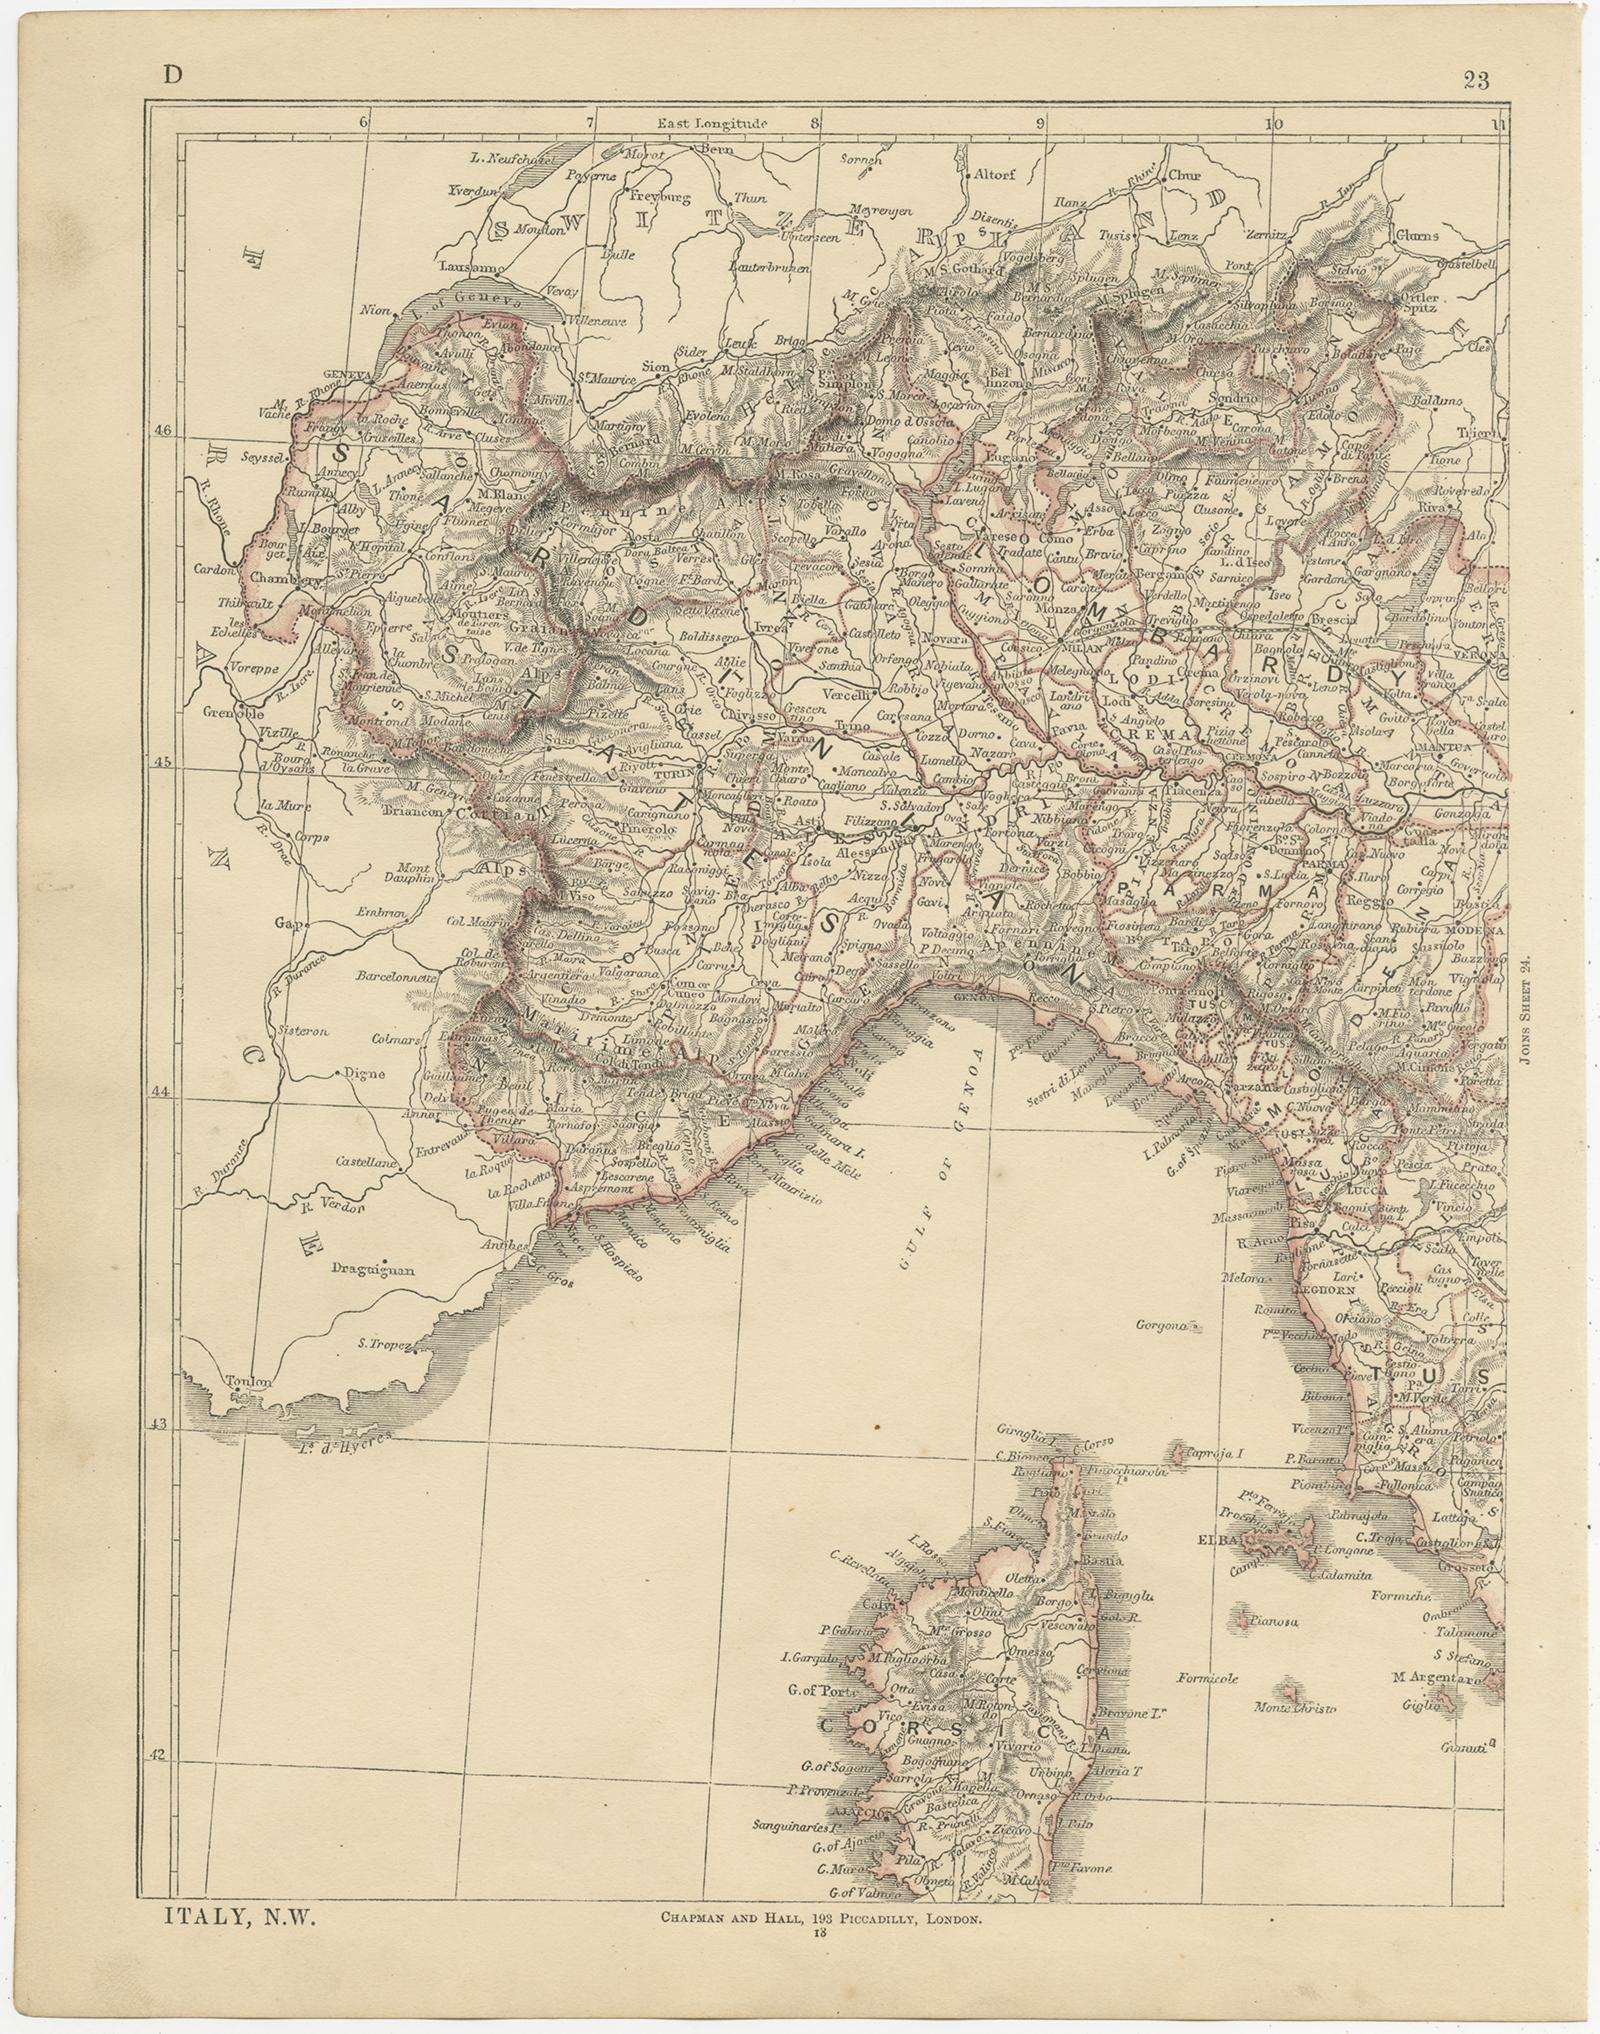 Antique map titled 'Italy, Sardinia and Corsica'. Four individual sheets of Italy, Sardinia and Corsica. This map originates from 'Lowry's table atlas constructed and engraved from the most recent Authorities' by J.W. Lowry. Published 1852.